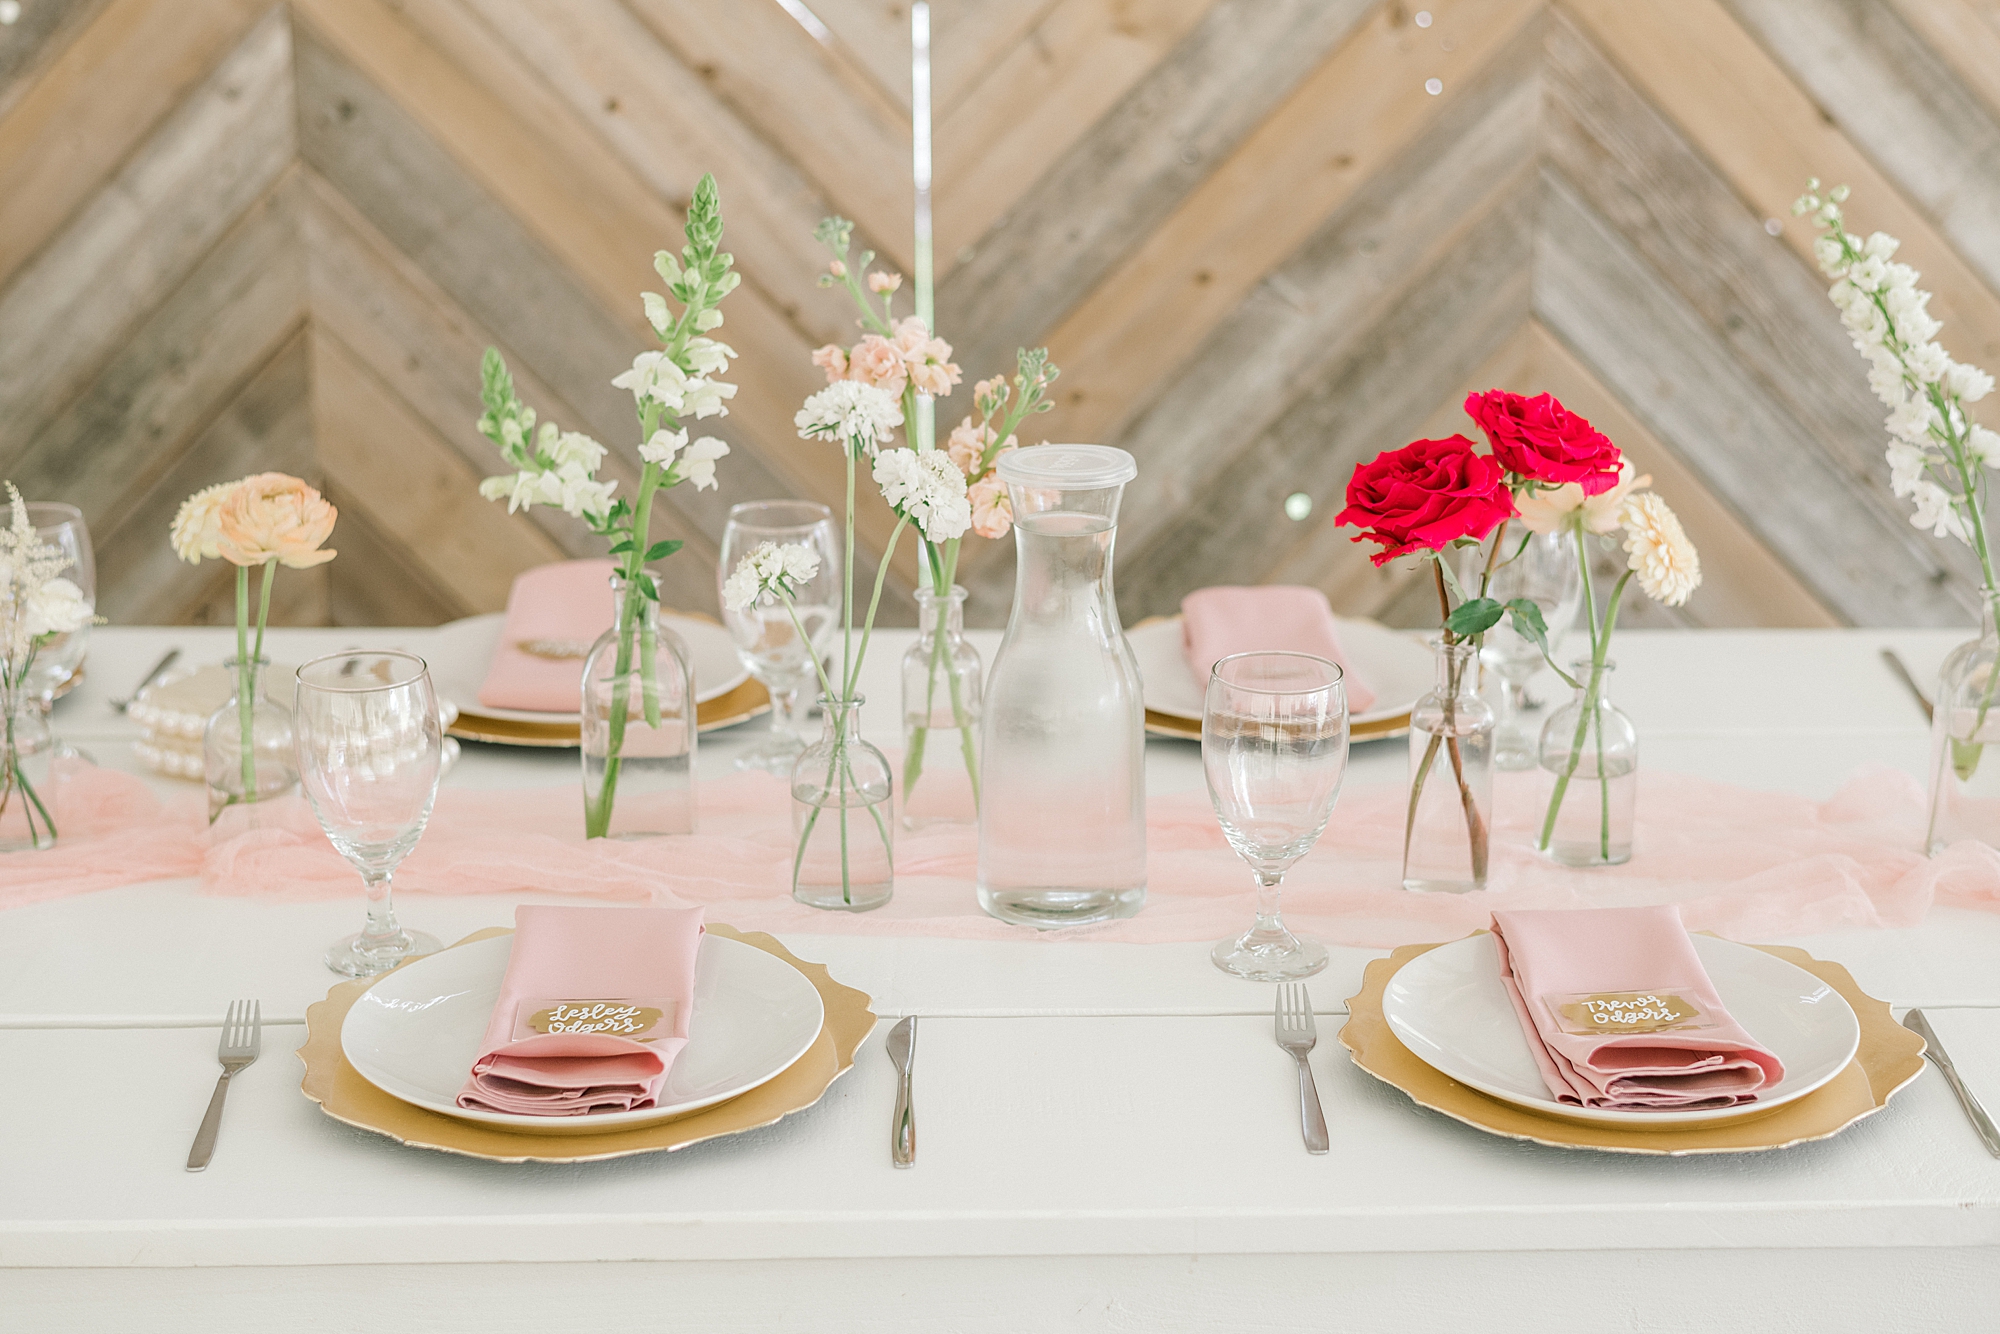 wedding reception table scape with pink wildflower centerpieces and gold and pink place settings